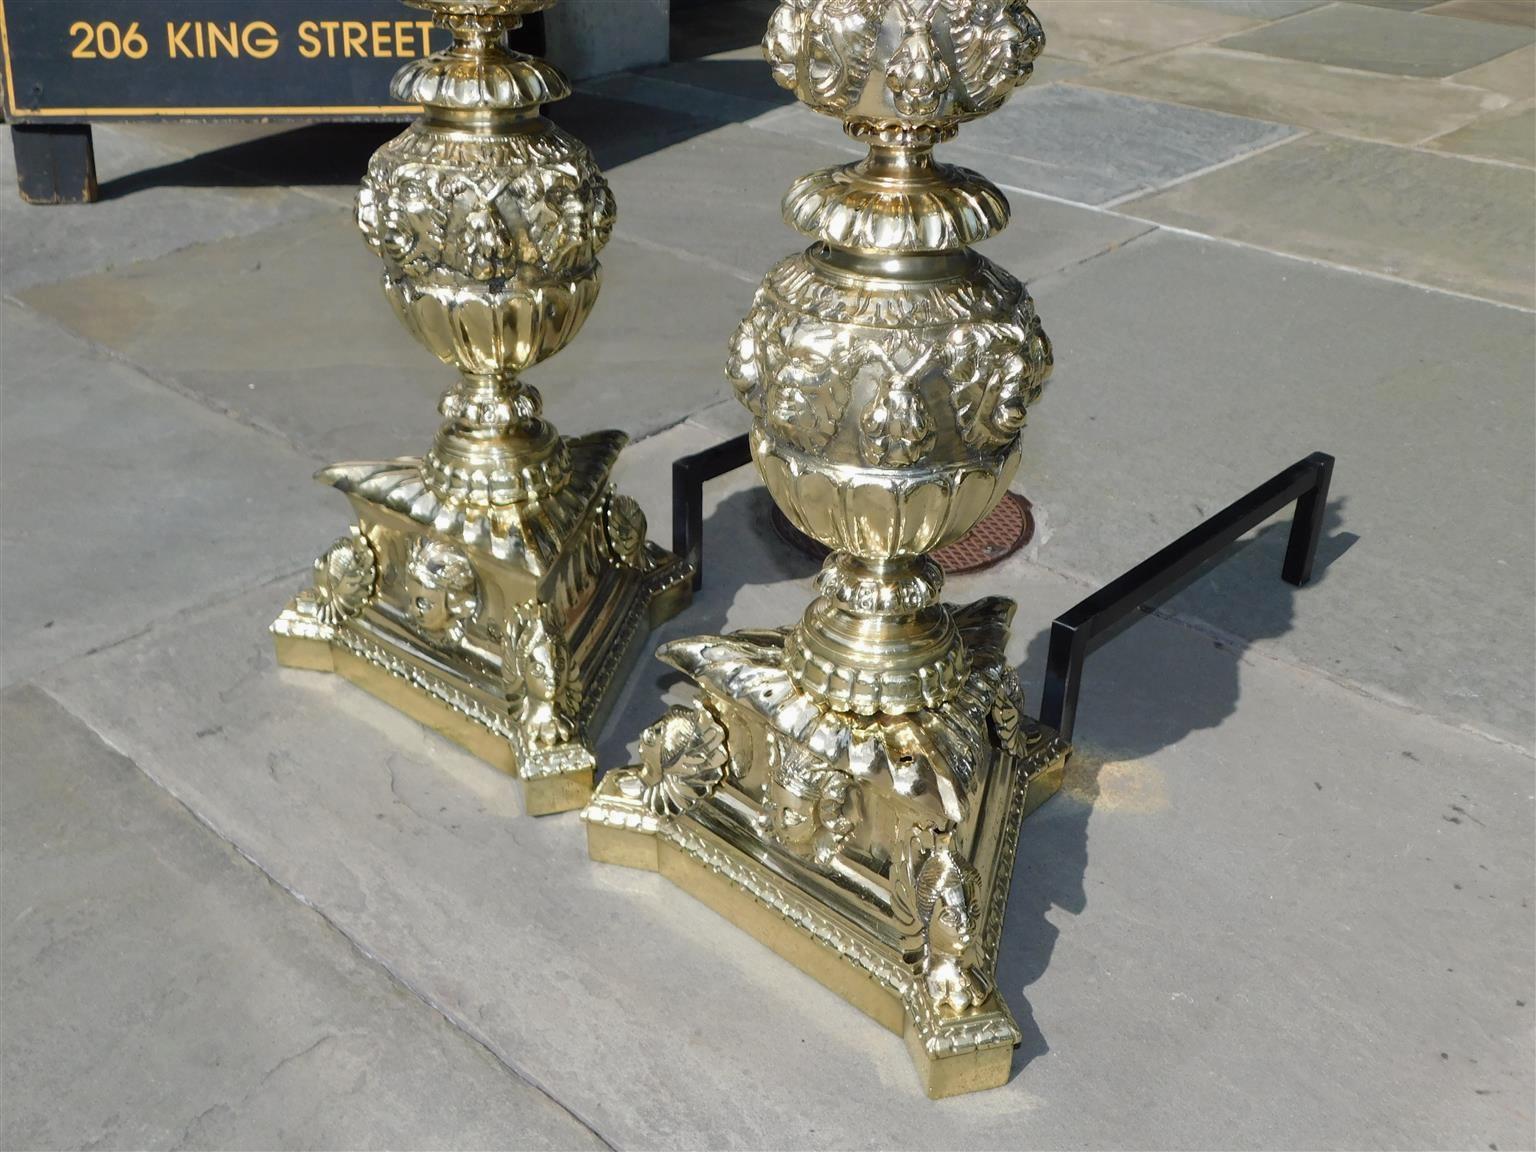 Pair of Italian Brass Neoclassical Figural Tiered Urn Finial Andirons, C. 1820 For Sale 1